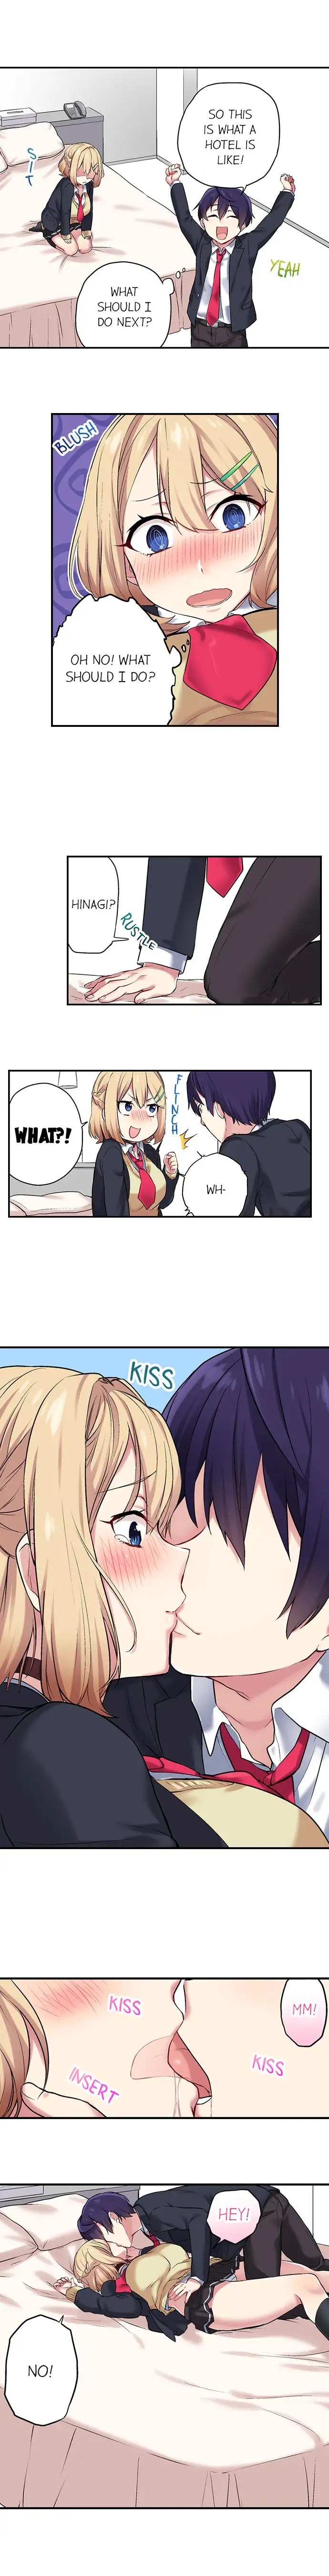 Committee Chairman, Didn’t You Just Masturbate In the Bathroom? I Can See the Number of Times People Orgasm - Chapter 3 Page 9